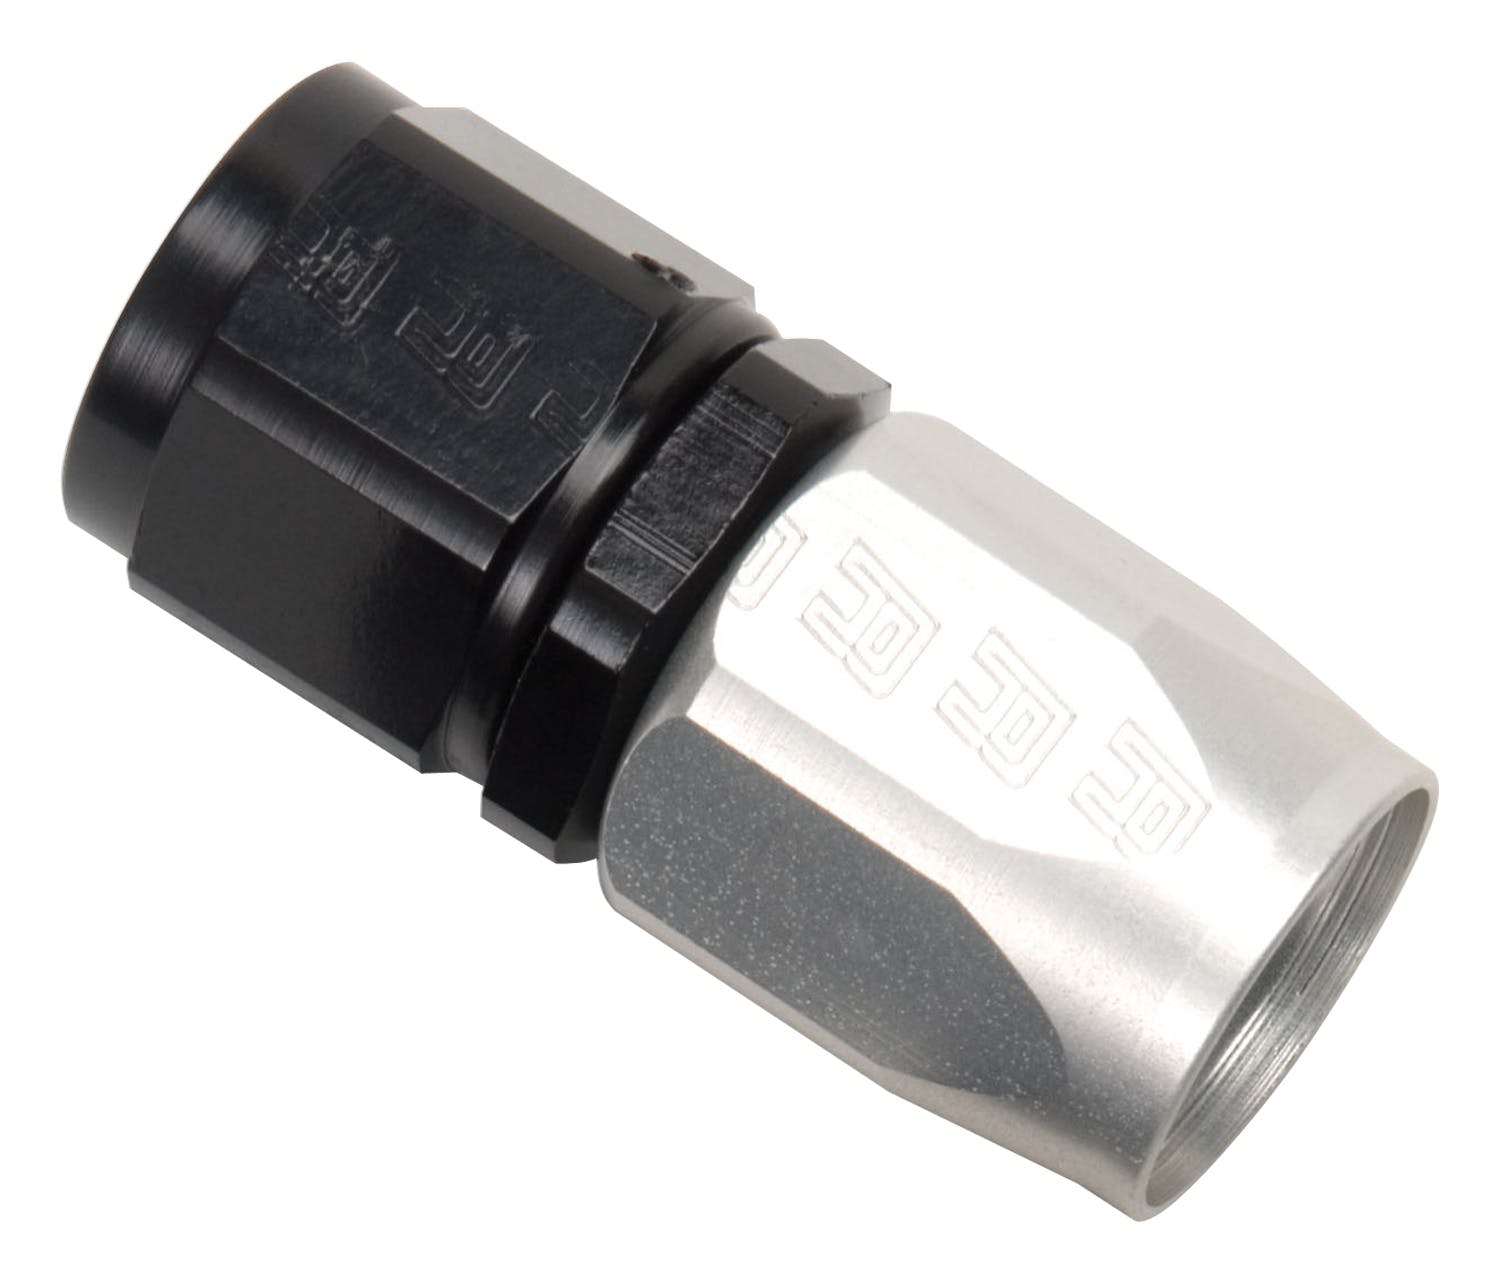 Russell 610013 Hose End - Full Flow Straight -4 Blk/Clr Finish